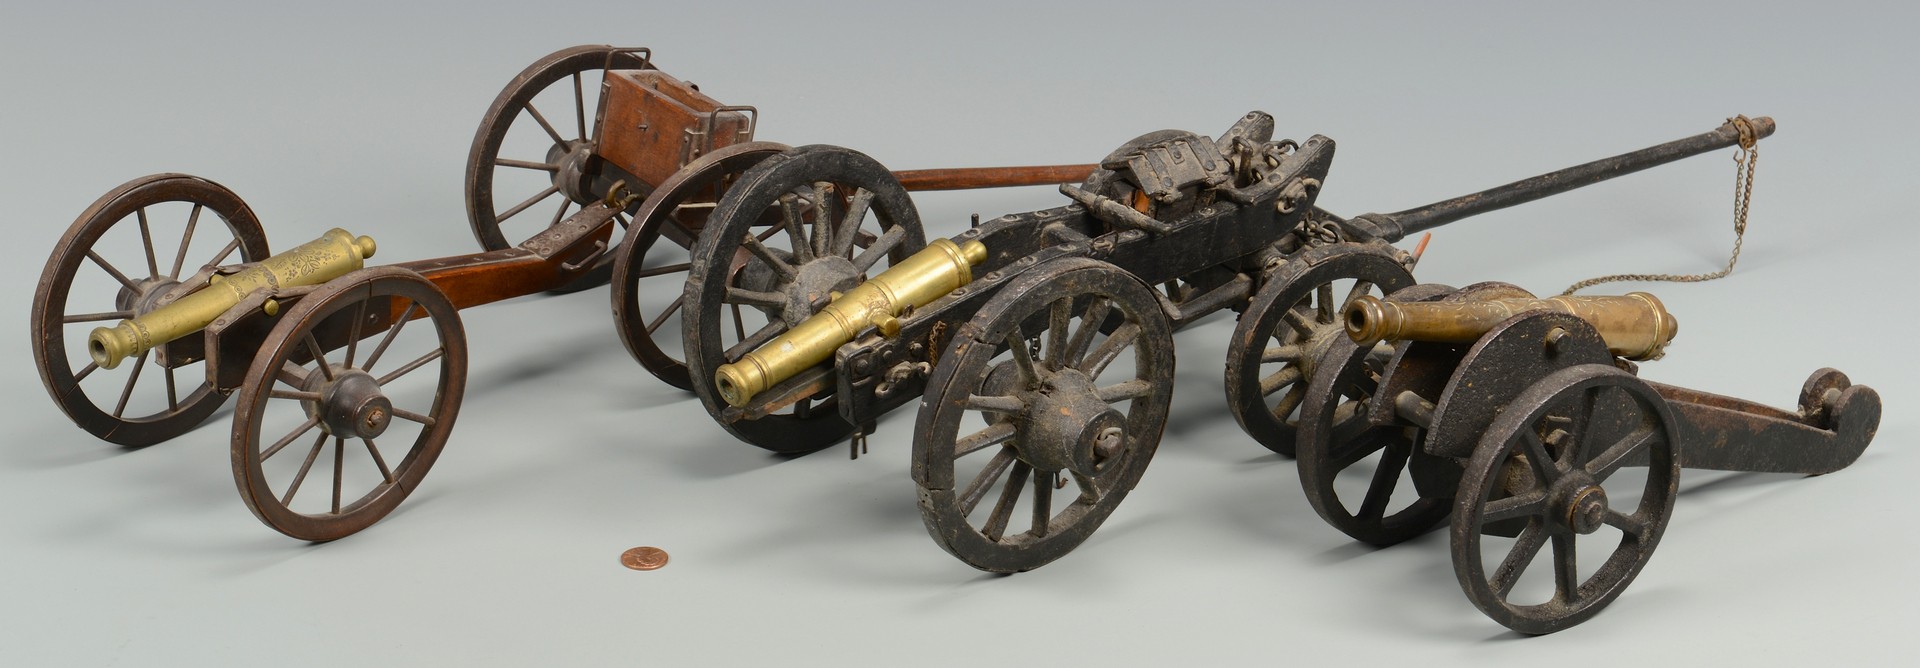 Lot 580: 3 Miniature Cannons w/ Caisson & Other